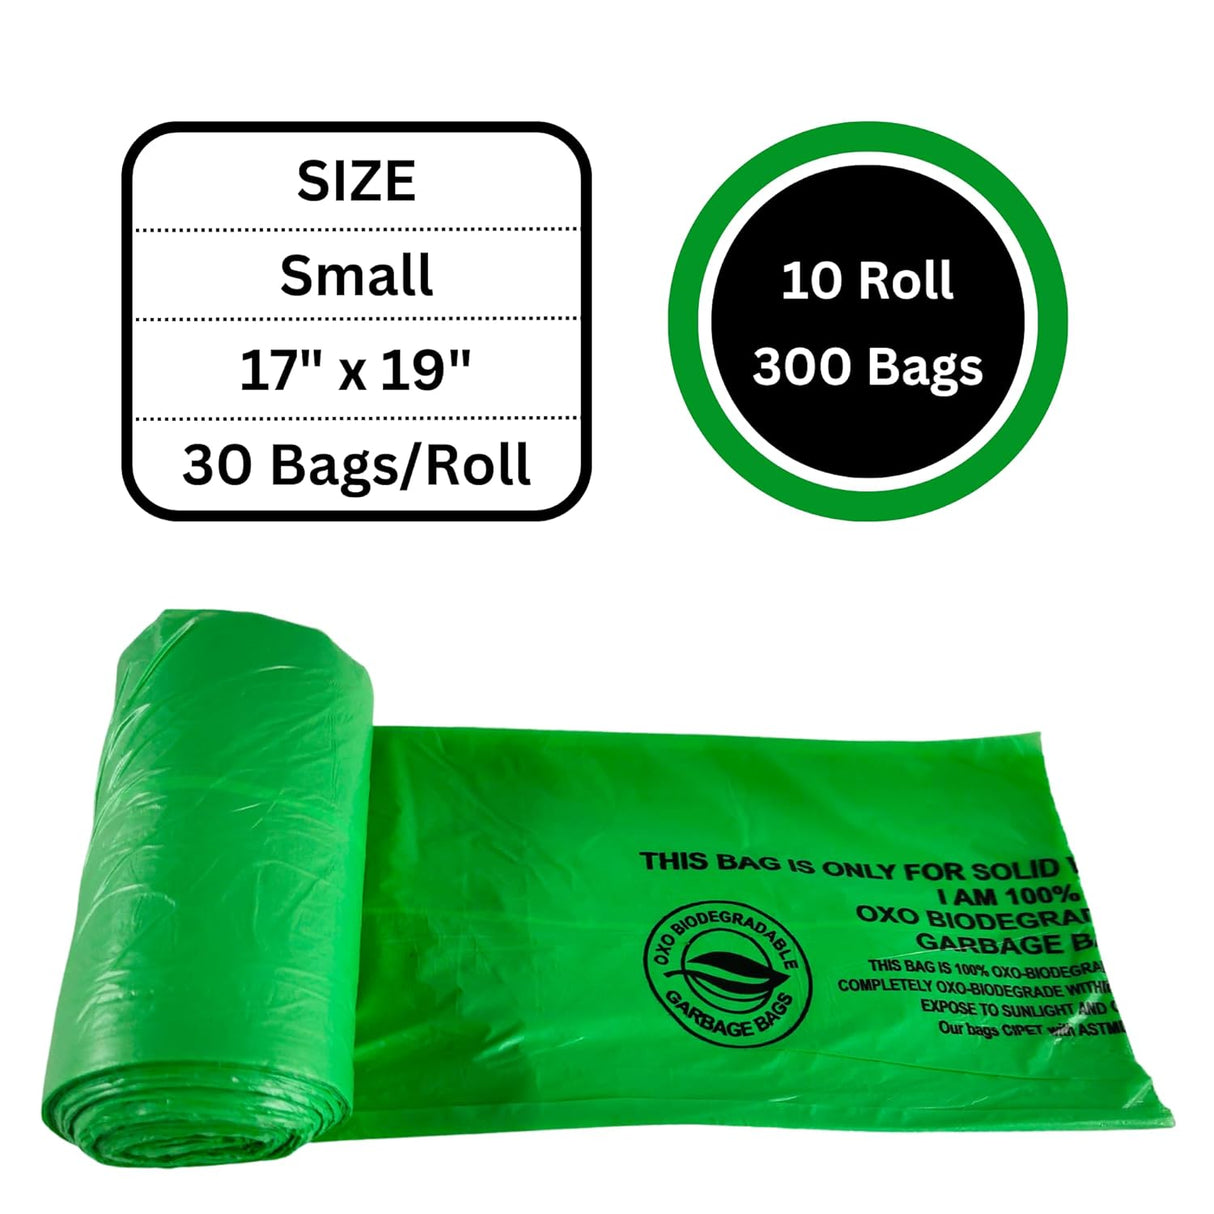 Singhal Compostable/Biodegradable Garbage Bags 17 X 19 Inches (Small Size) 300 Bags (10 Rolls) Dustbin Bag/Trash Bag - Green Color | With Easy Tie-Tapes